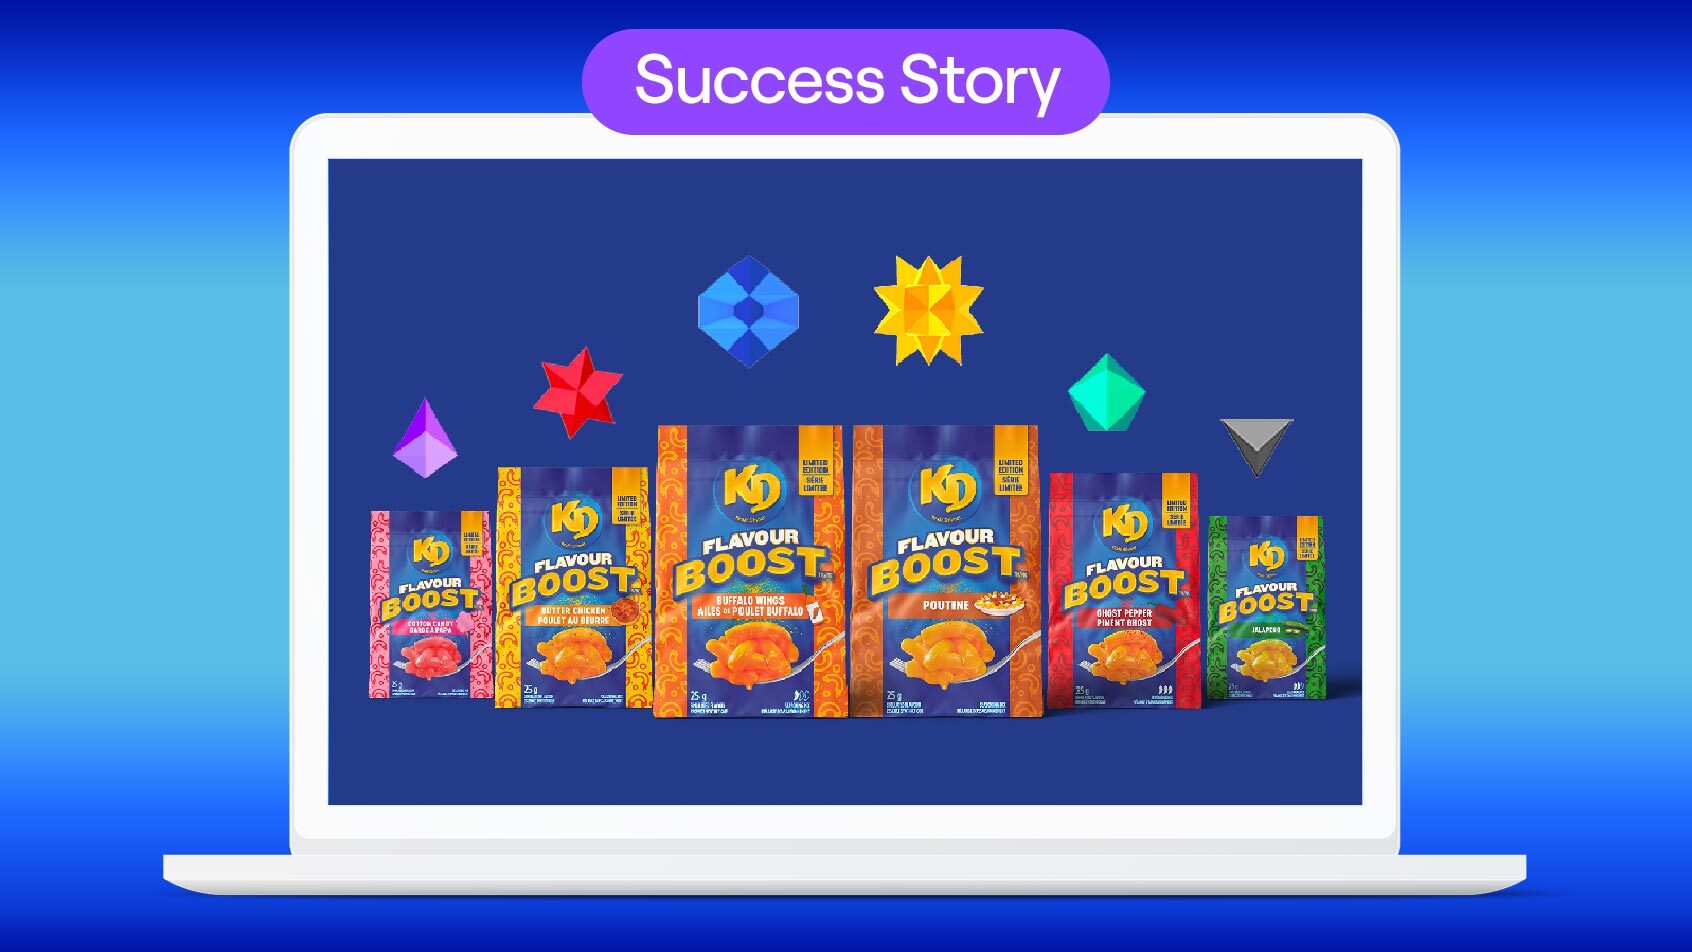 How Kraft Dinner gave meal time a boost with Twitch streamers